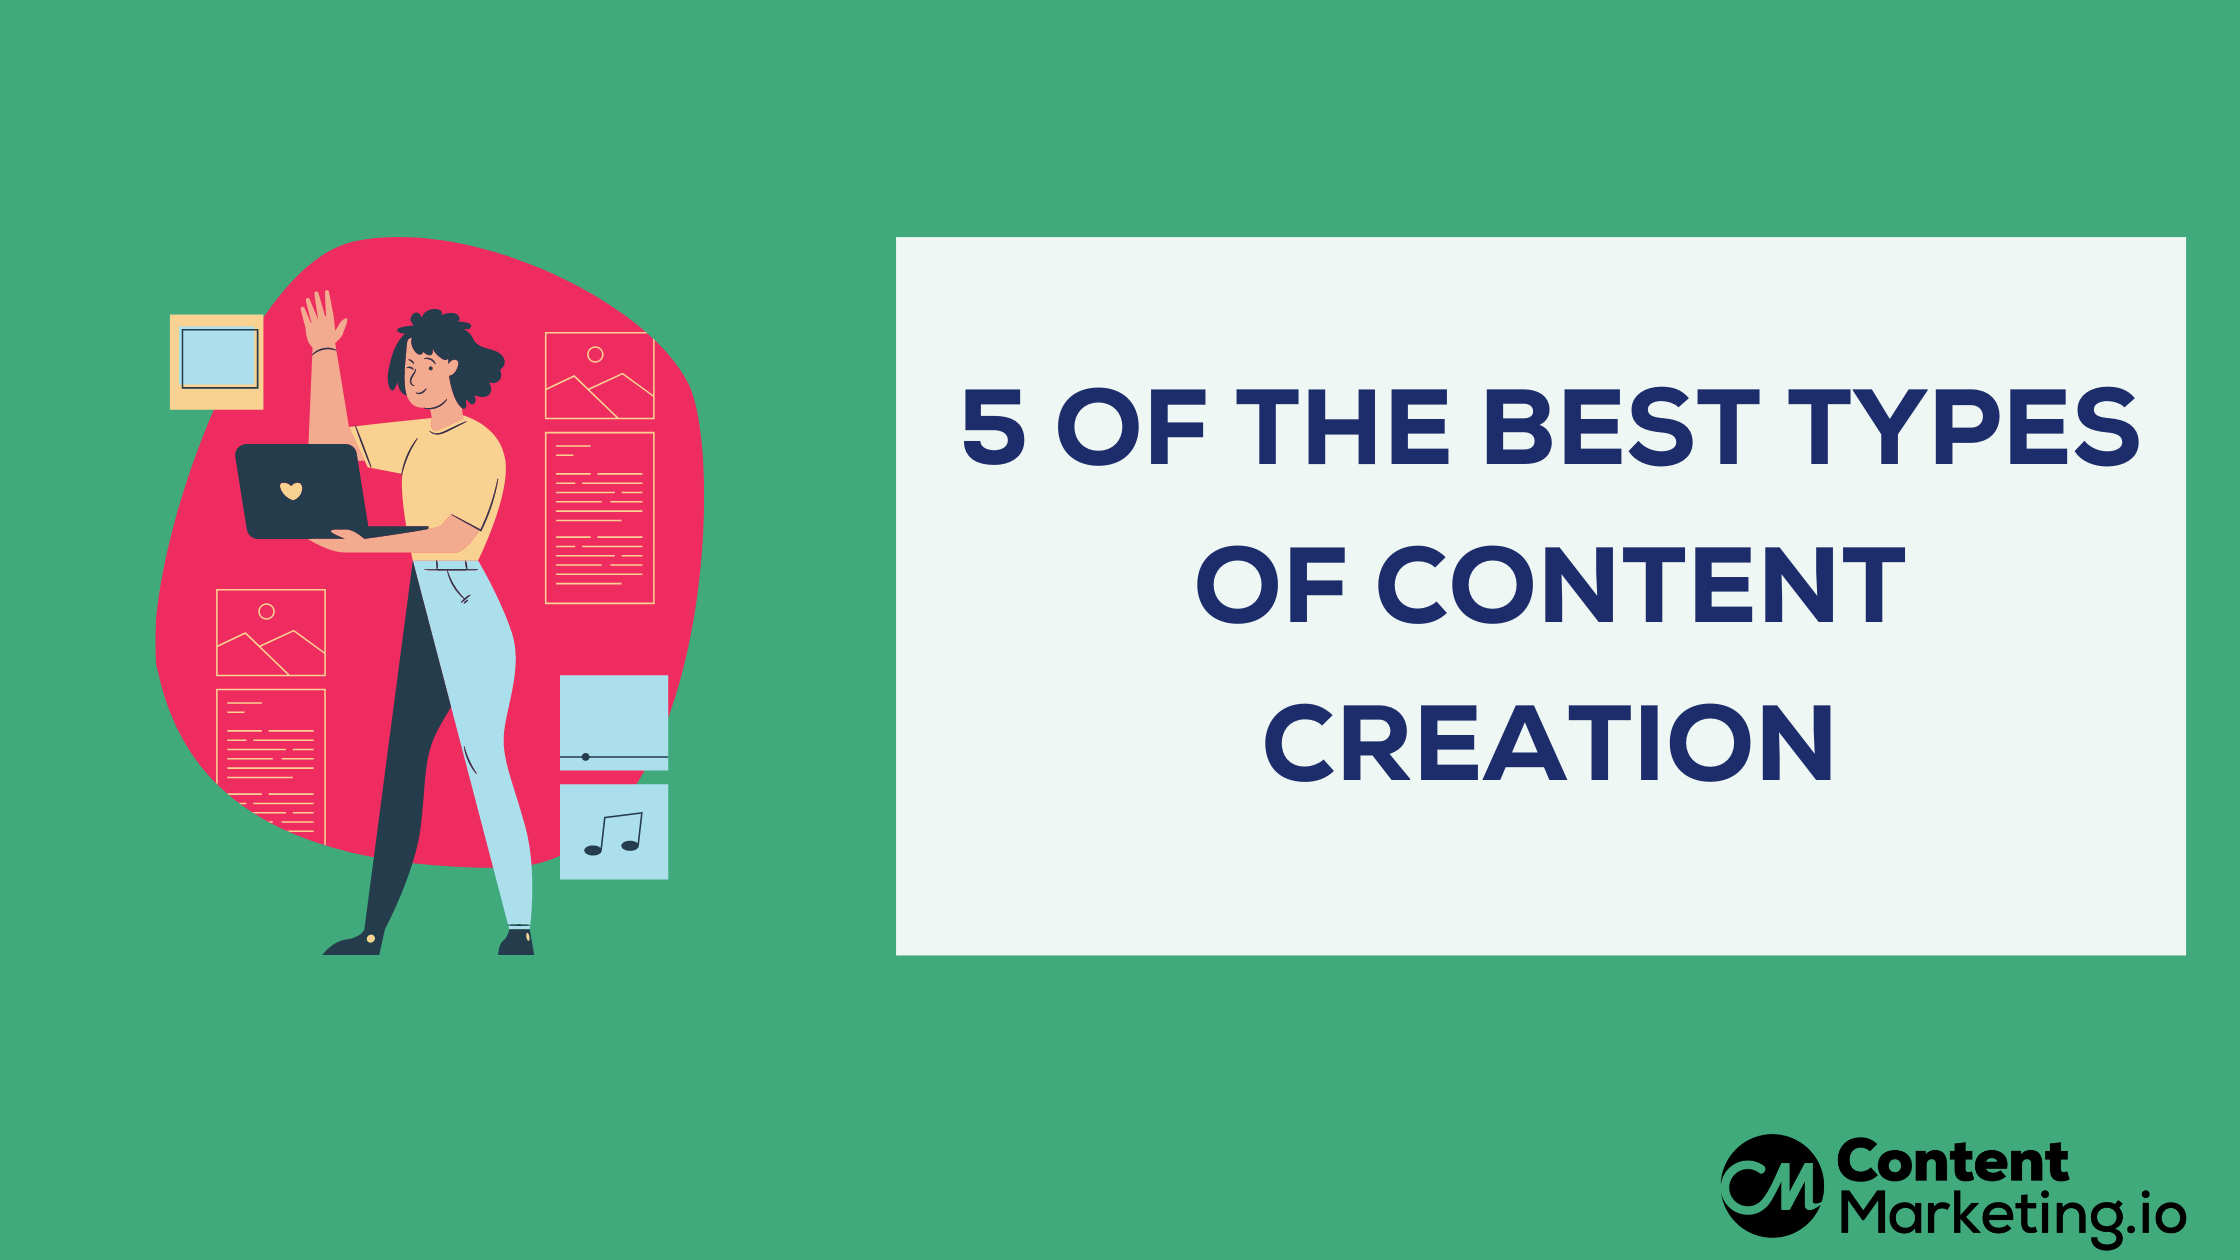 Types of Content Creation